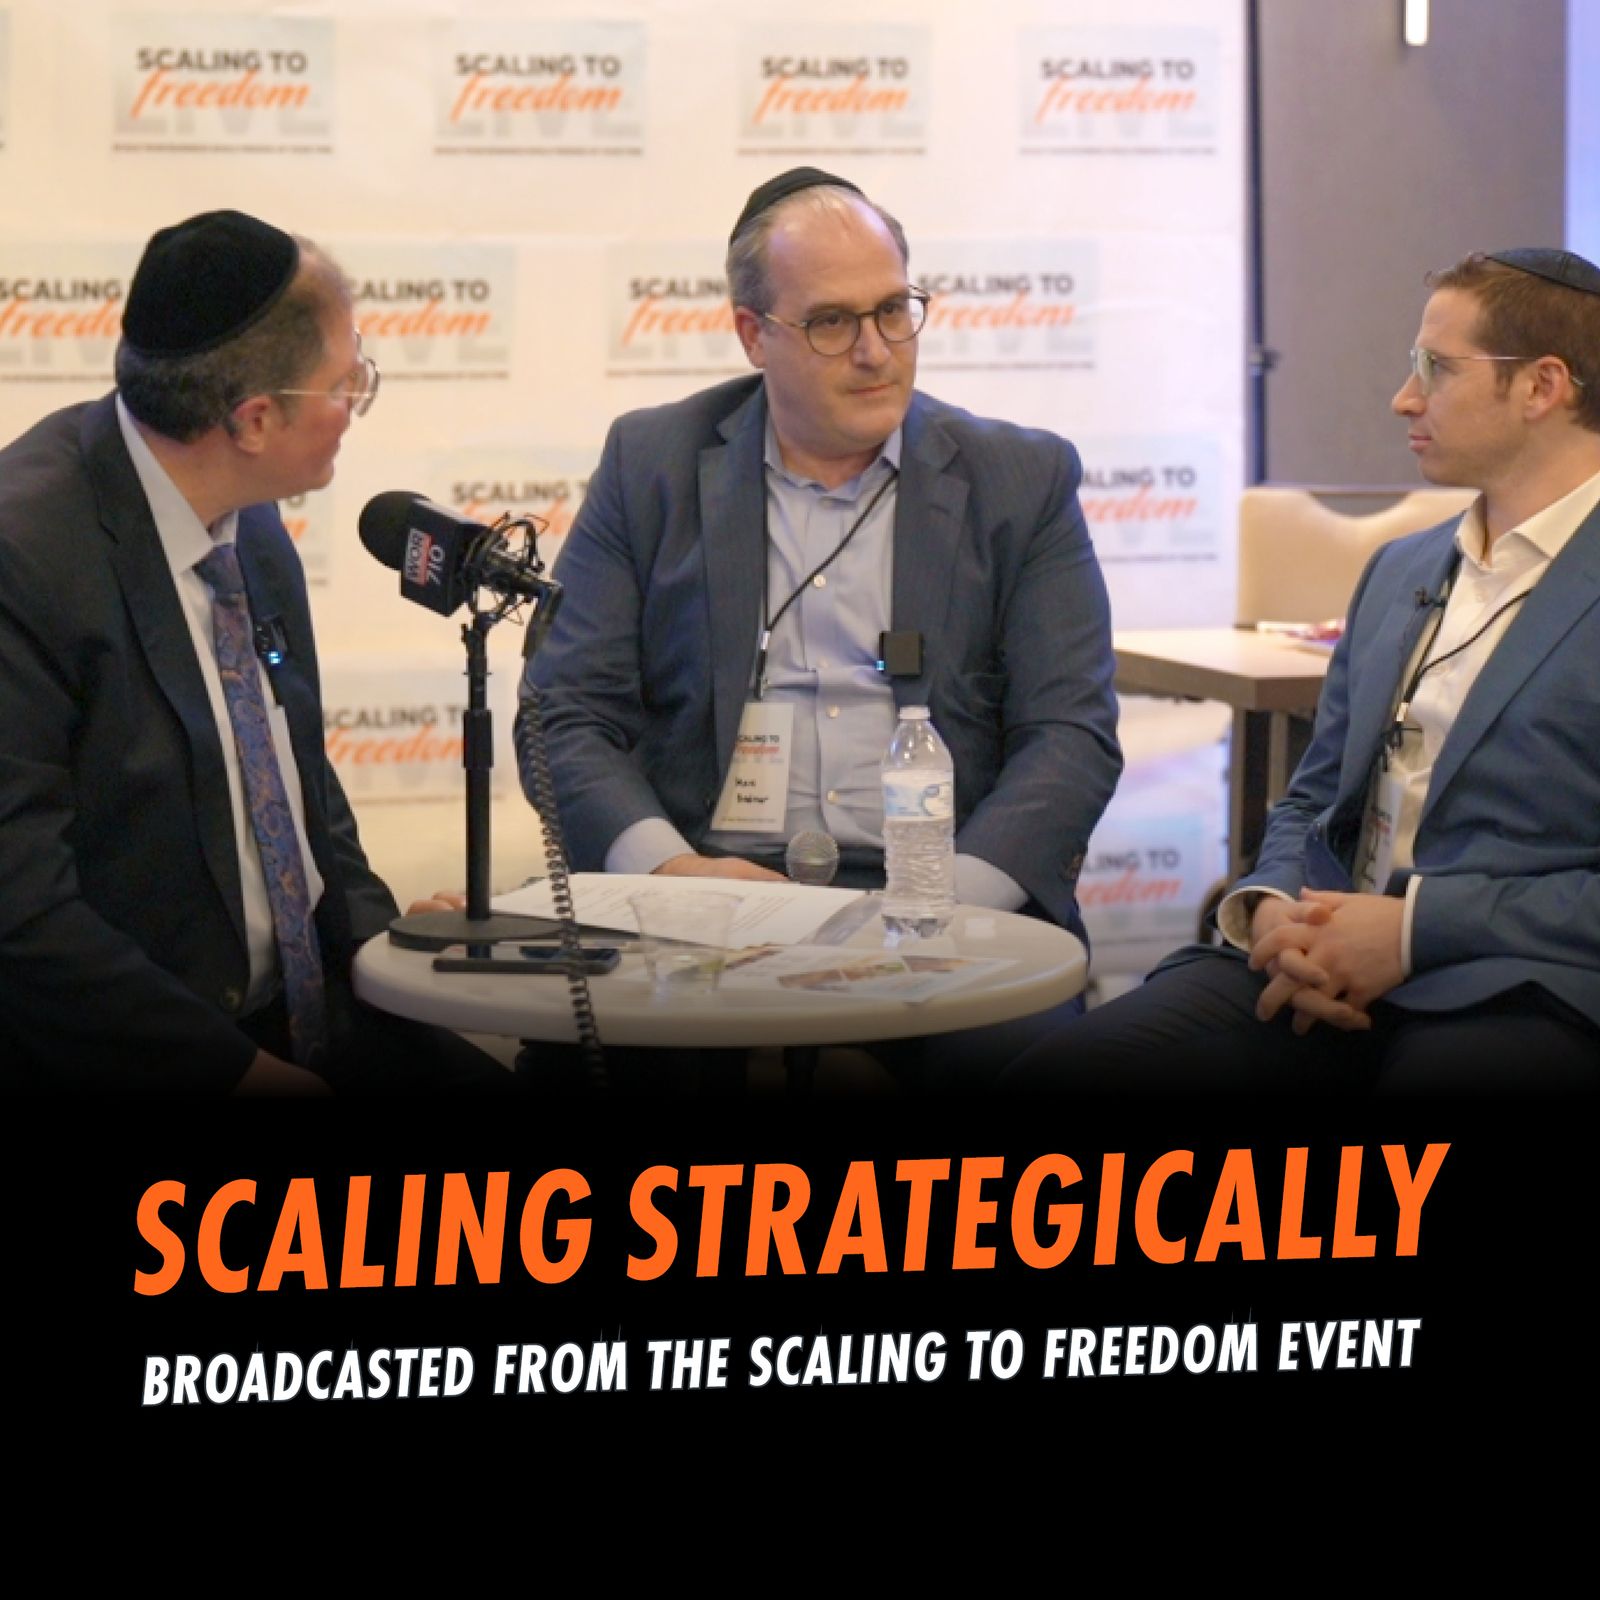 355: Scaling Strategically Broadcasted LIVE At The Recent Isaac Bardos “Scaling To Freedom” Event, co-hosted by Marc Bodner, CEO of L&R Distributors